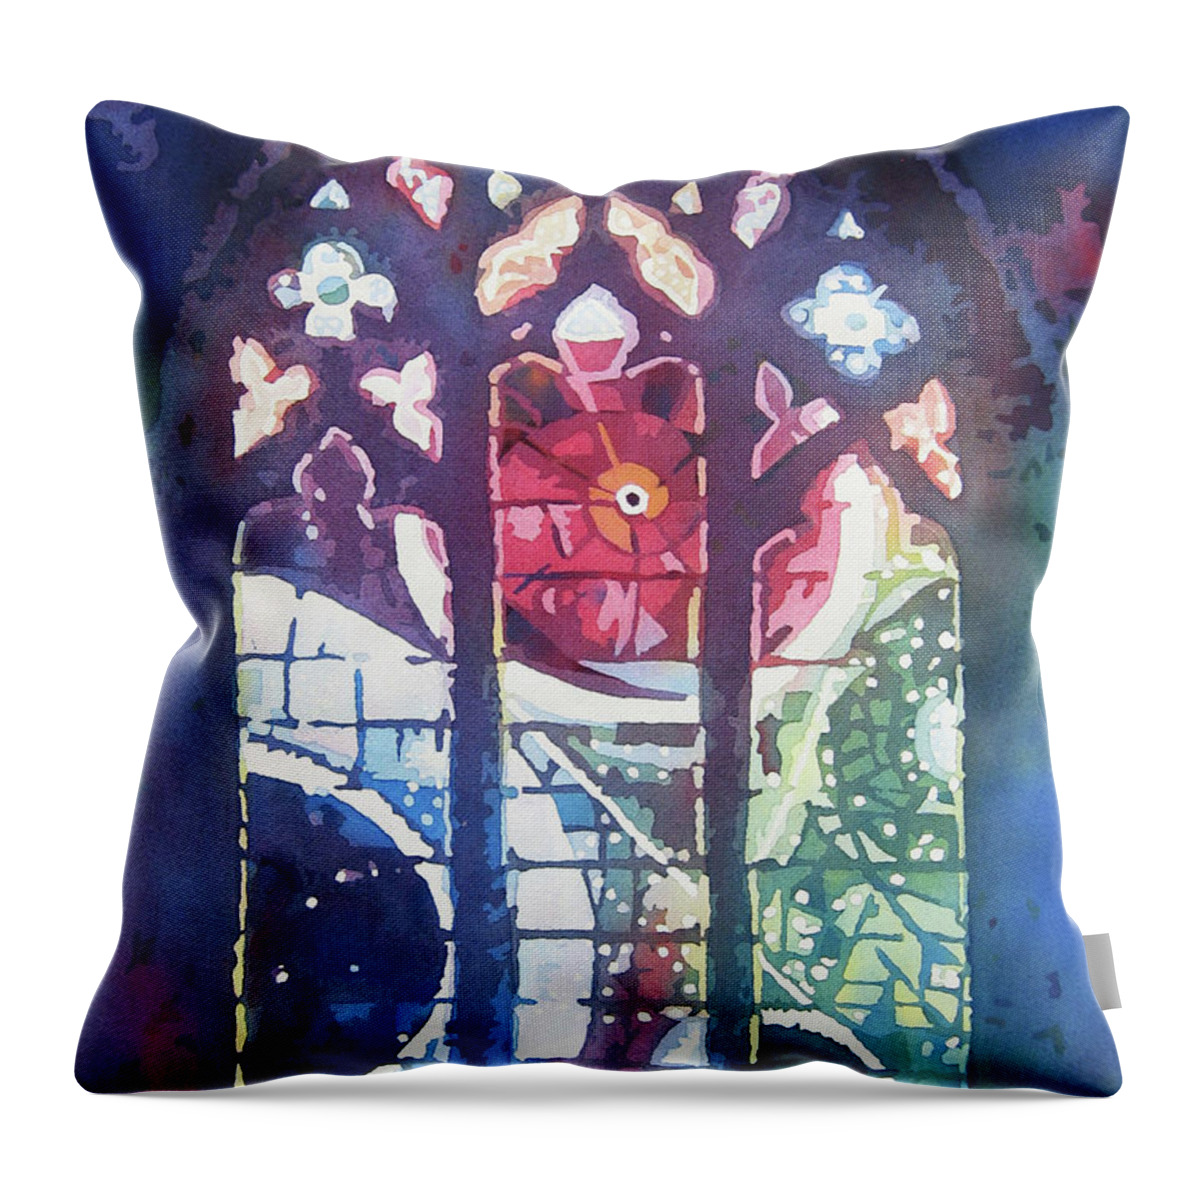  Nancy Charbeneau Throw Pillow featuring the painting Celestial Illuminations by Nancy Charbeneau